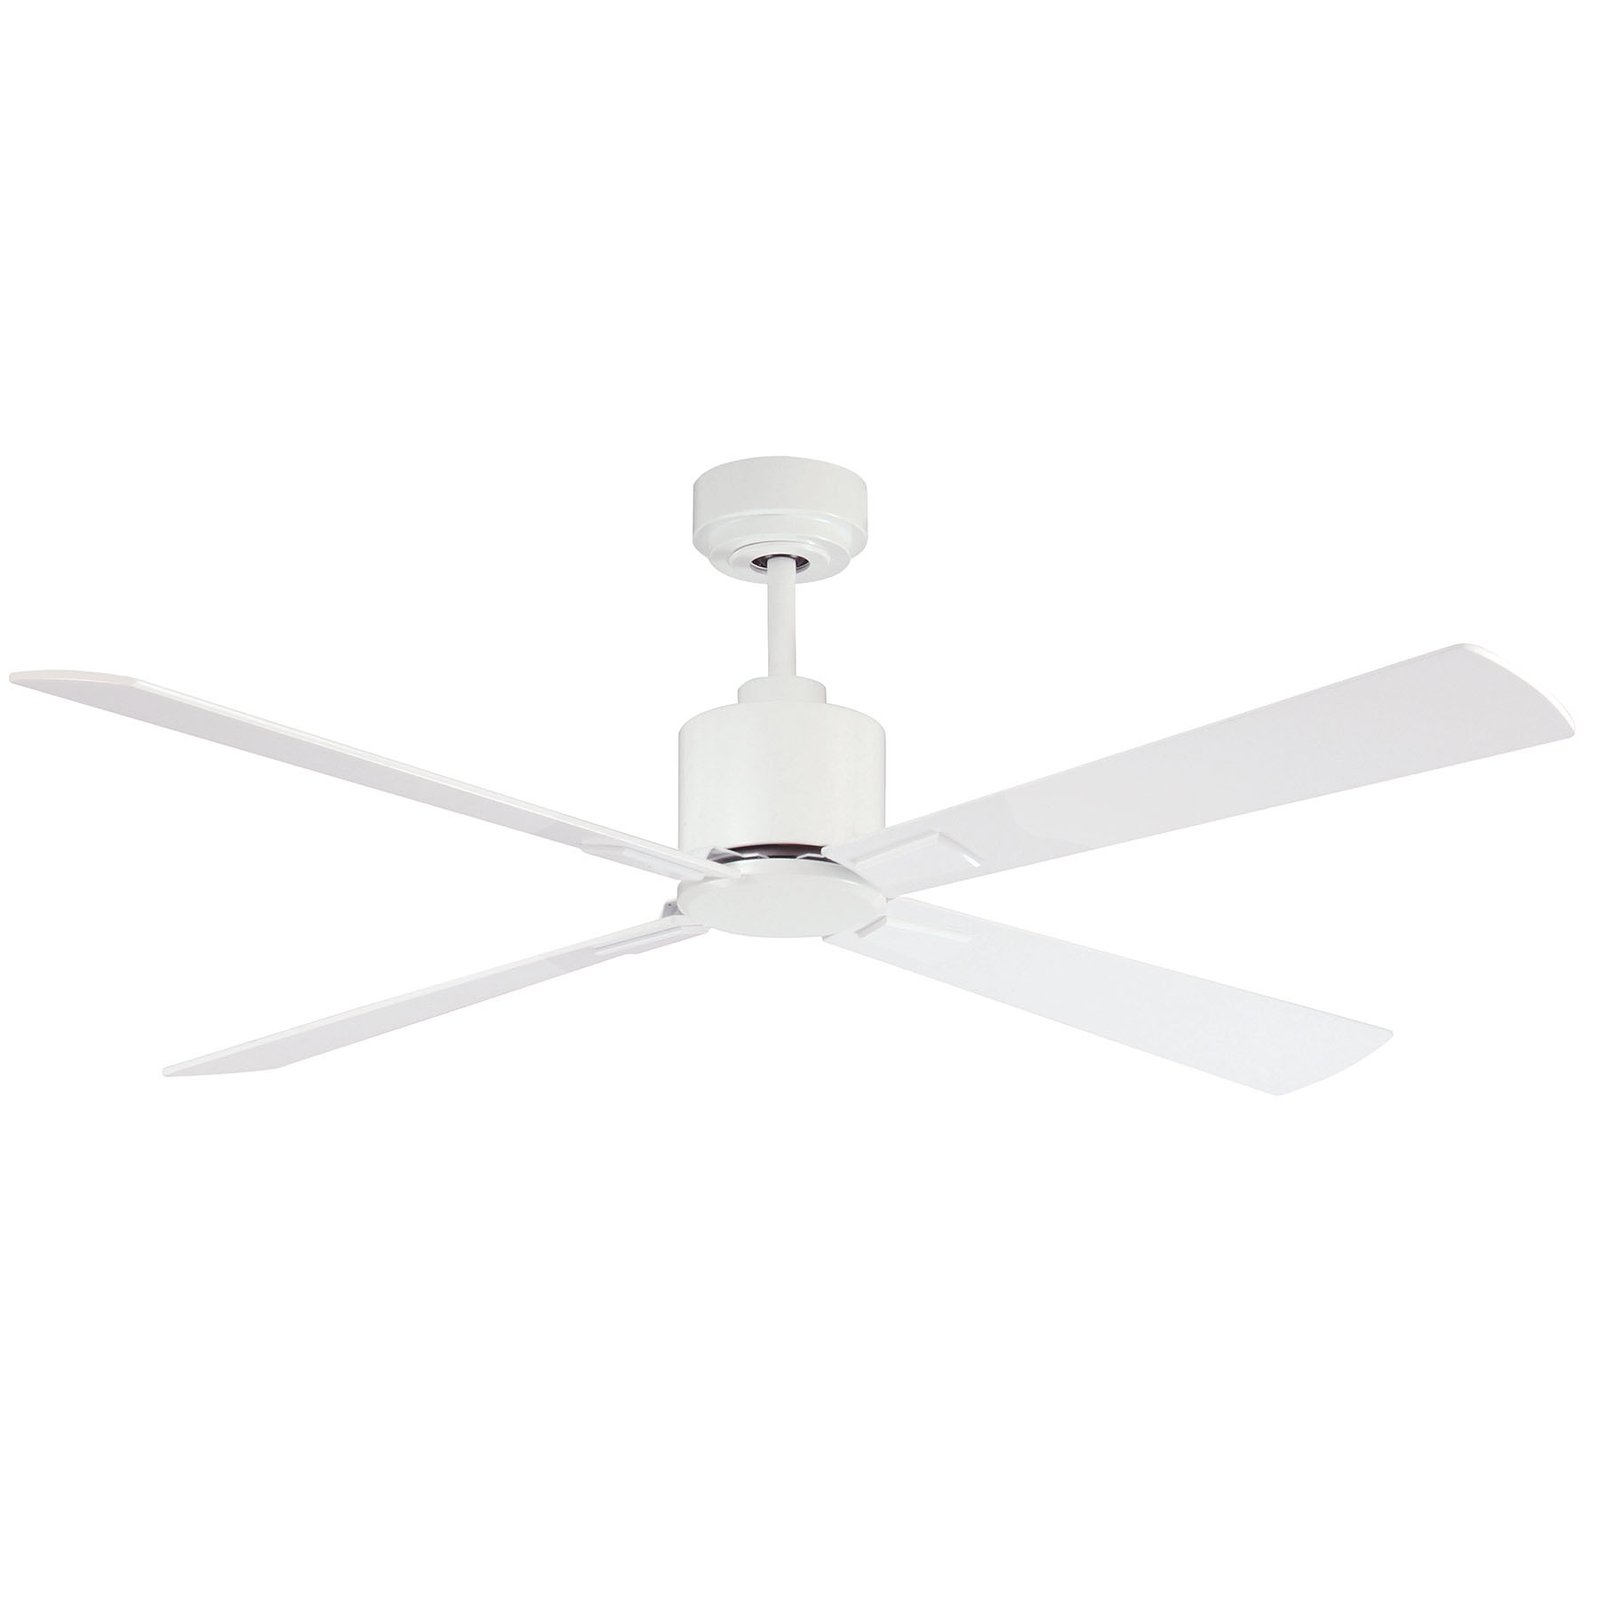 Beacon ceiling fan Airfusion Climate DC, white, quiet